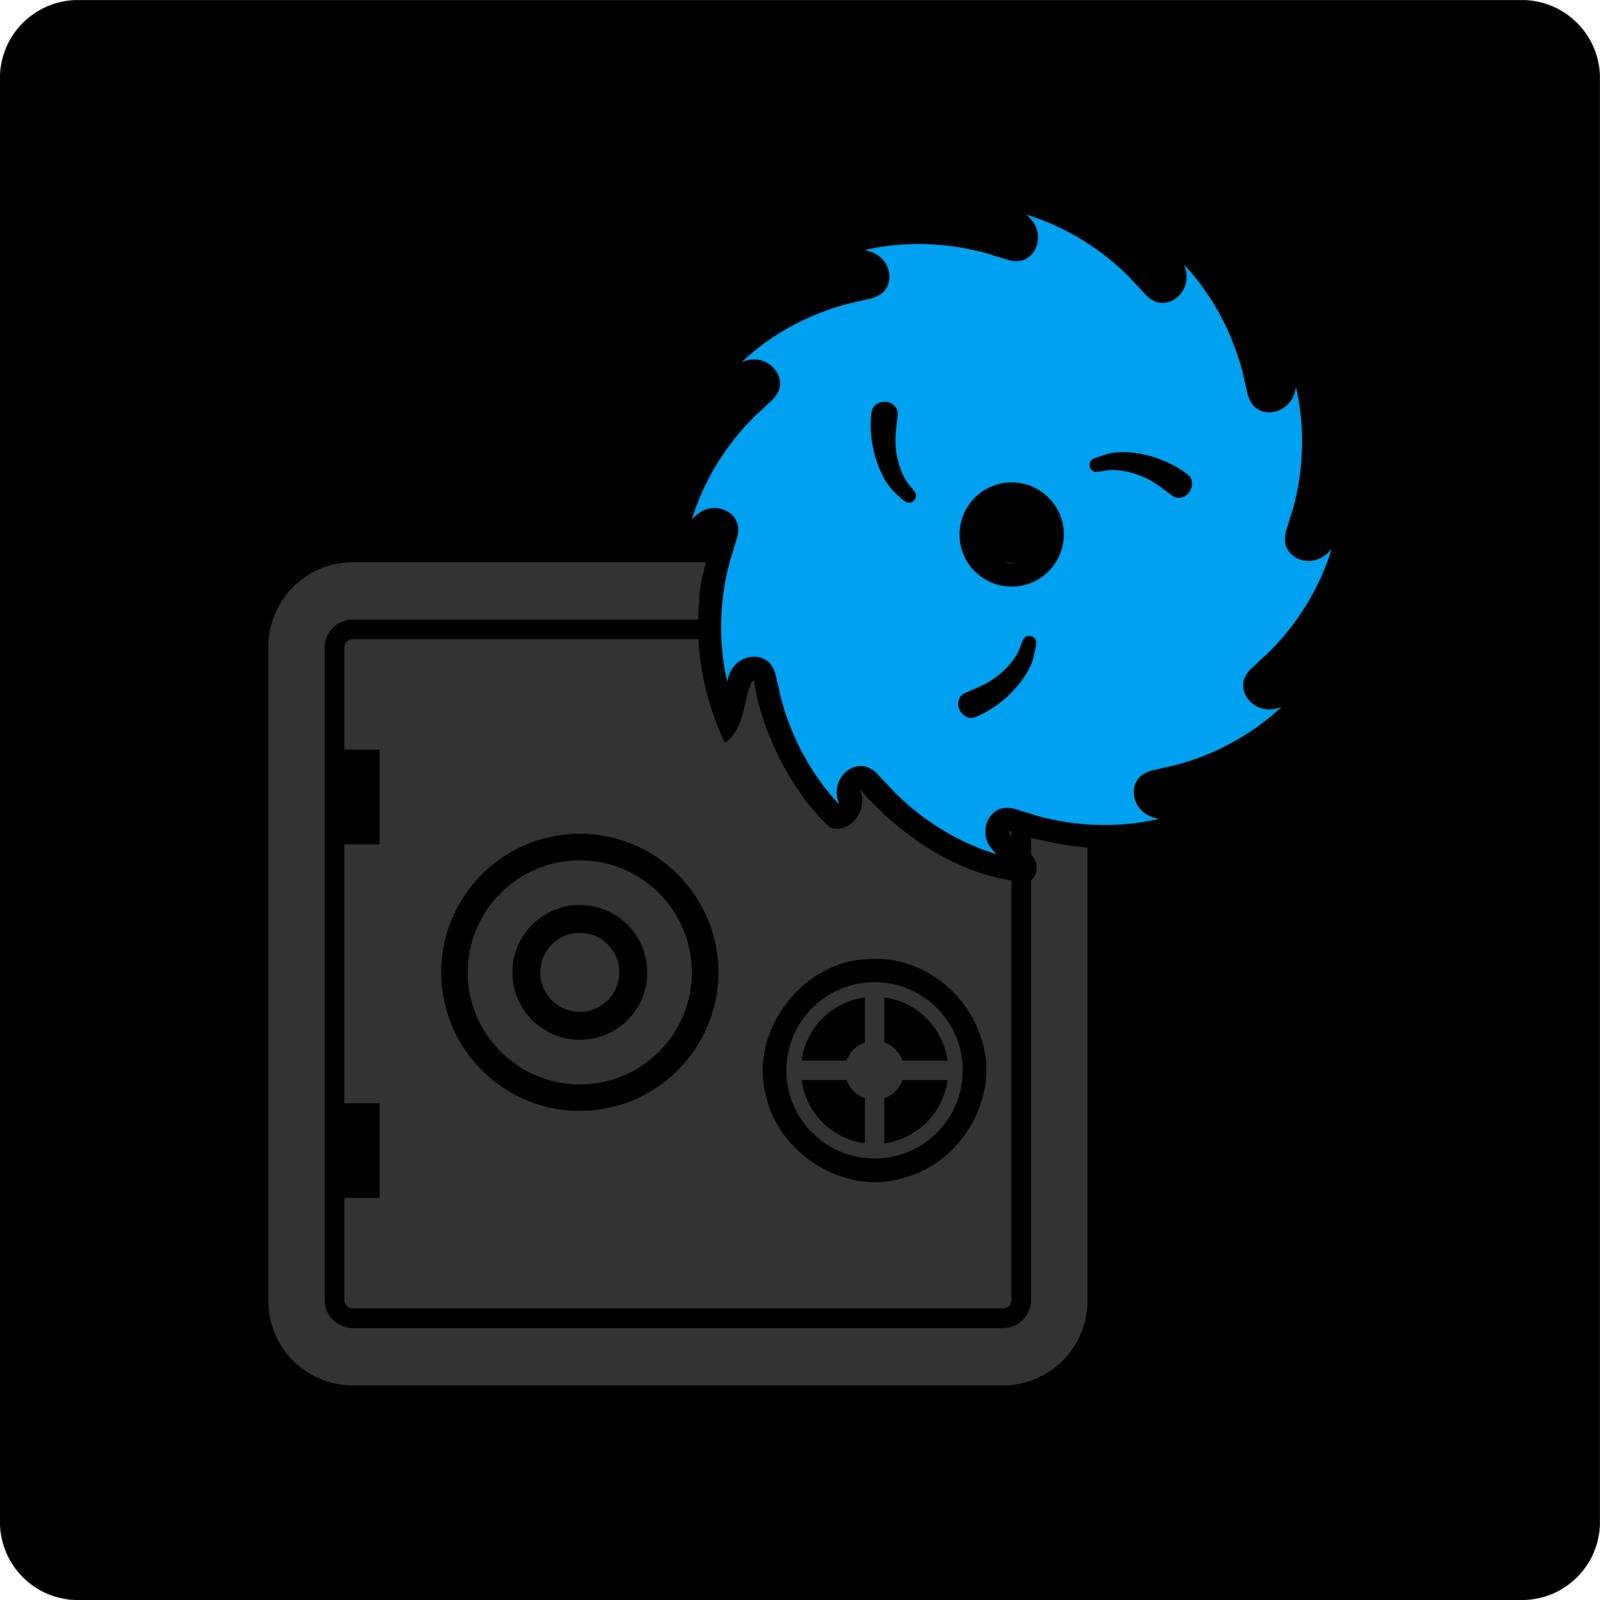 Hacking theft icon. Vector style is bicolor flat symbol, gray and light blue colors, black rounded square button, white background.